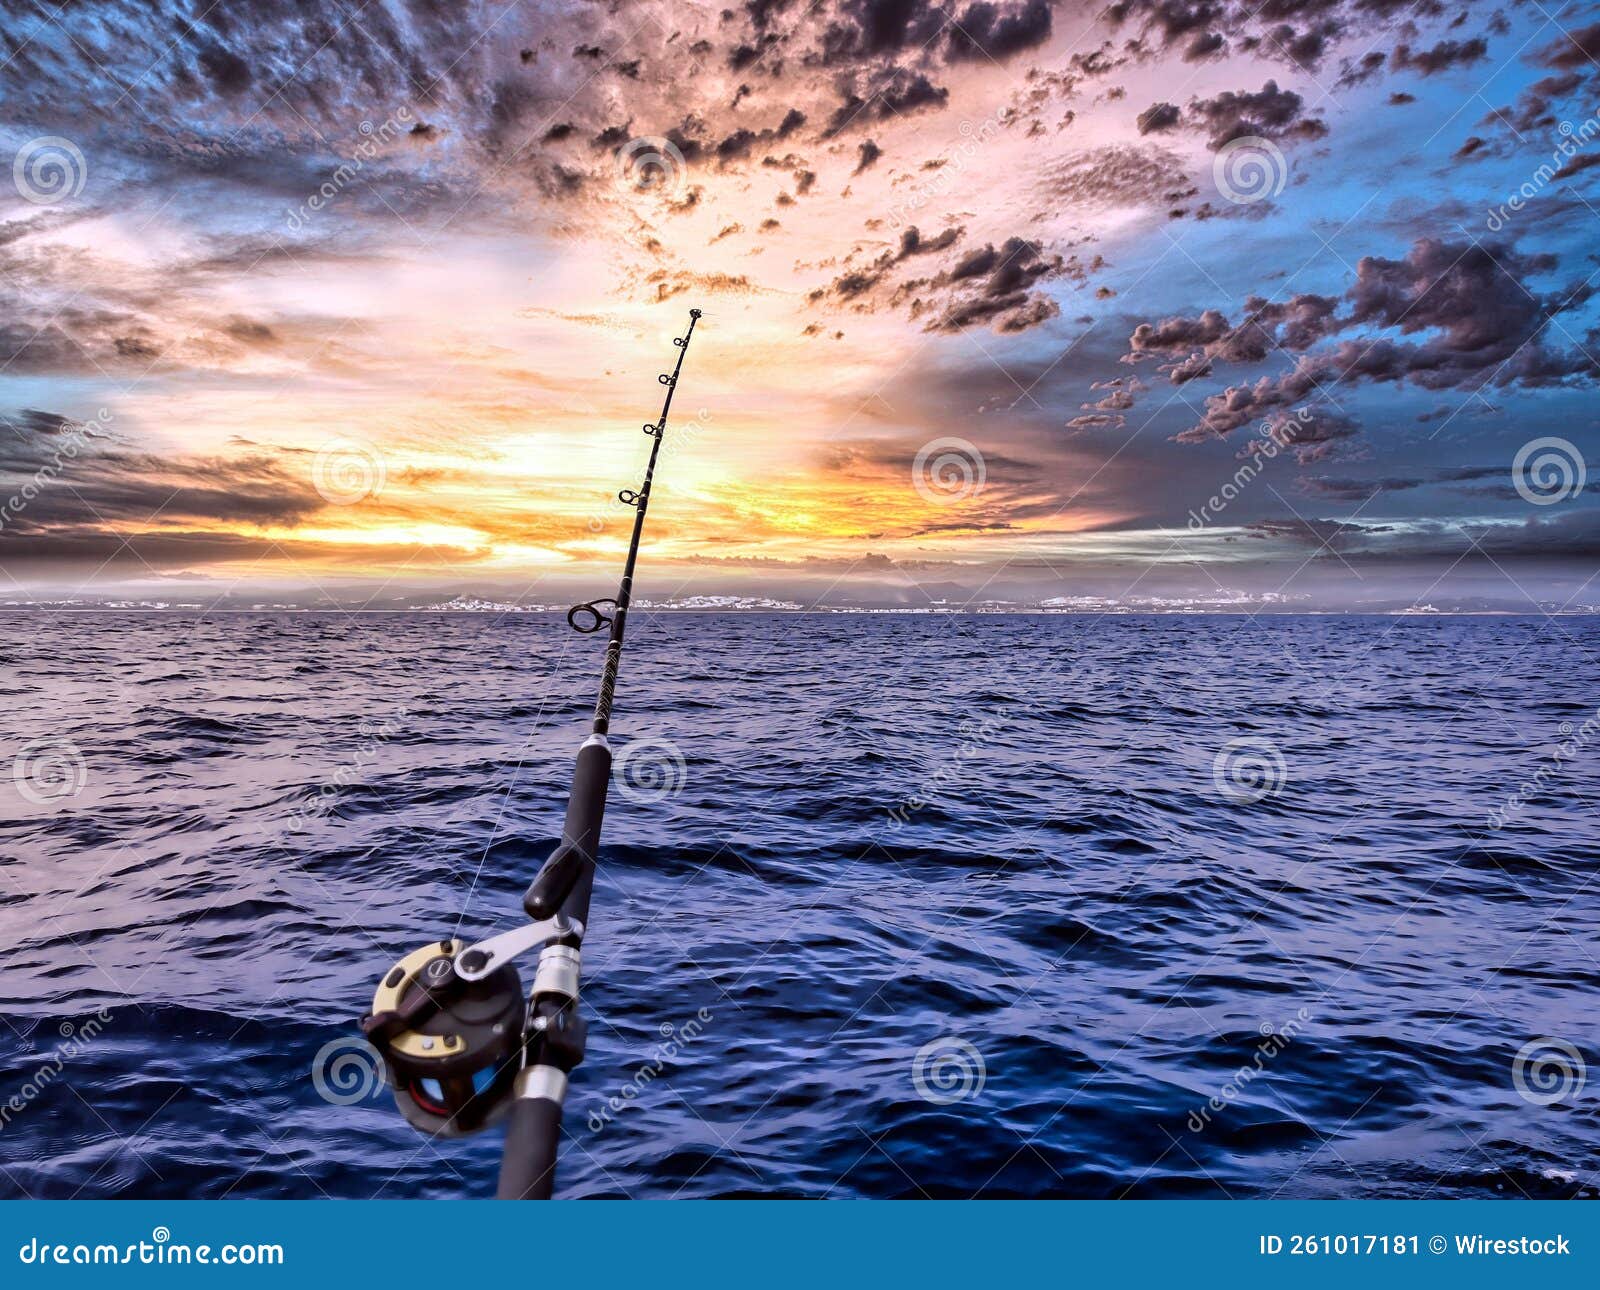 https://thumbs.dreamstime.com/z/fishing-rod-reel-anchored-to-ship-looking-big-catching-deep-seascape-offshore-sunrise-fishing-rod-reel-261017181.jpg